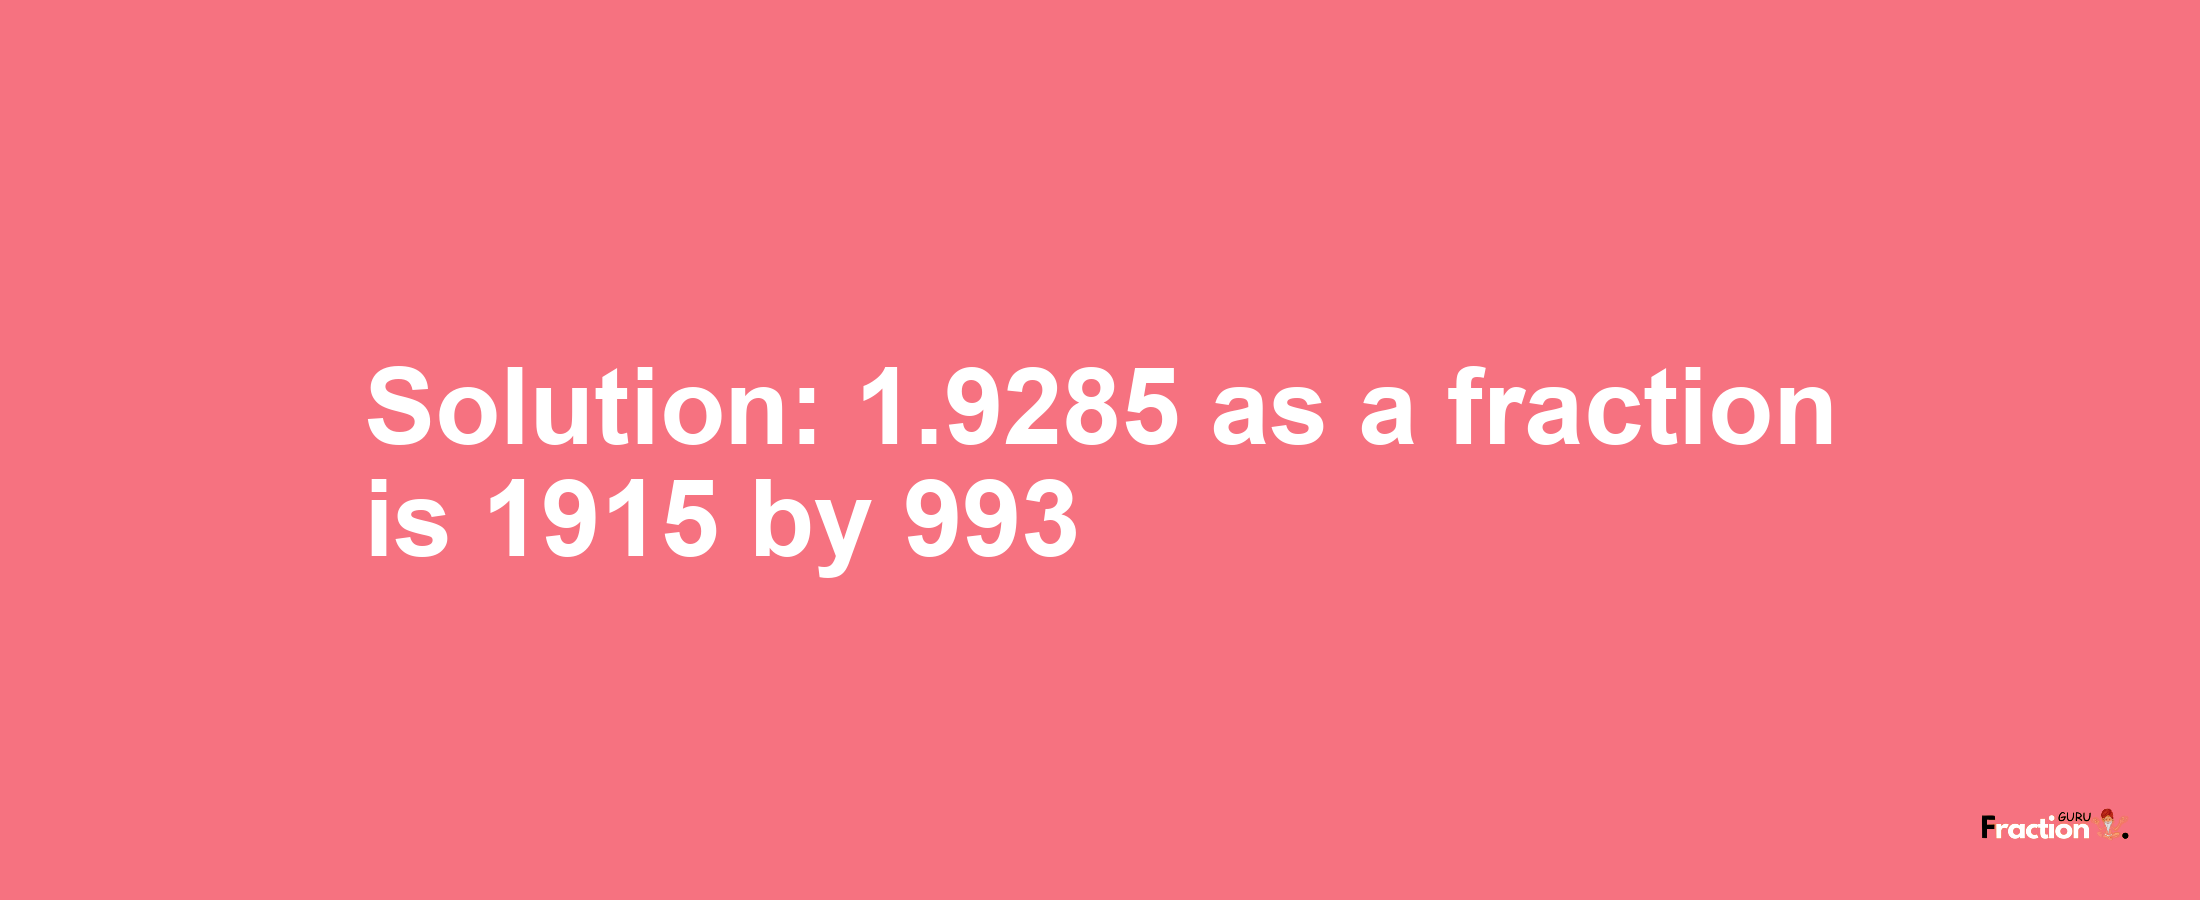 Solution:1.9285 as a fraction is 1915/993